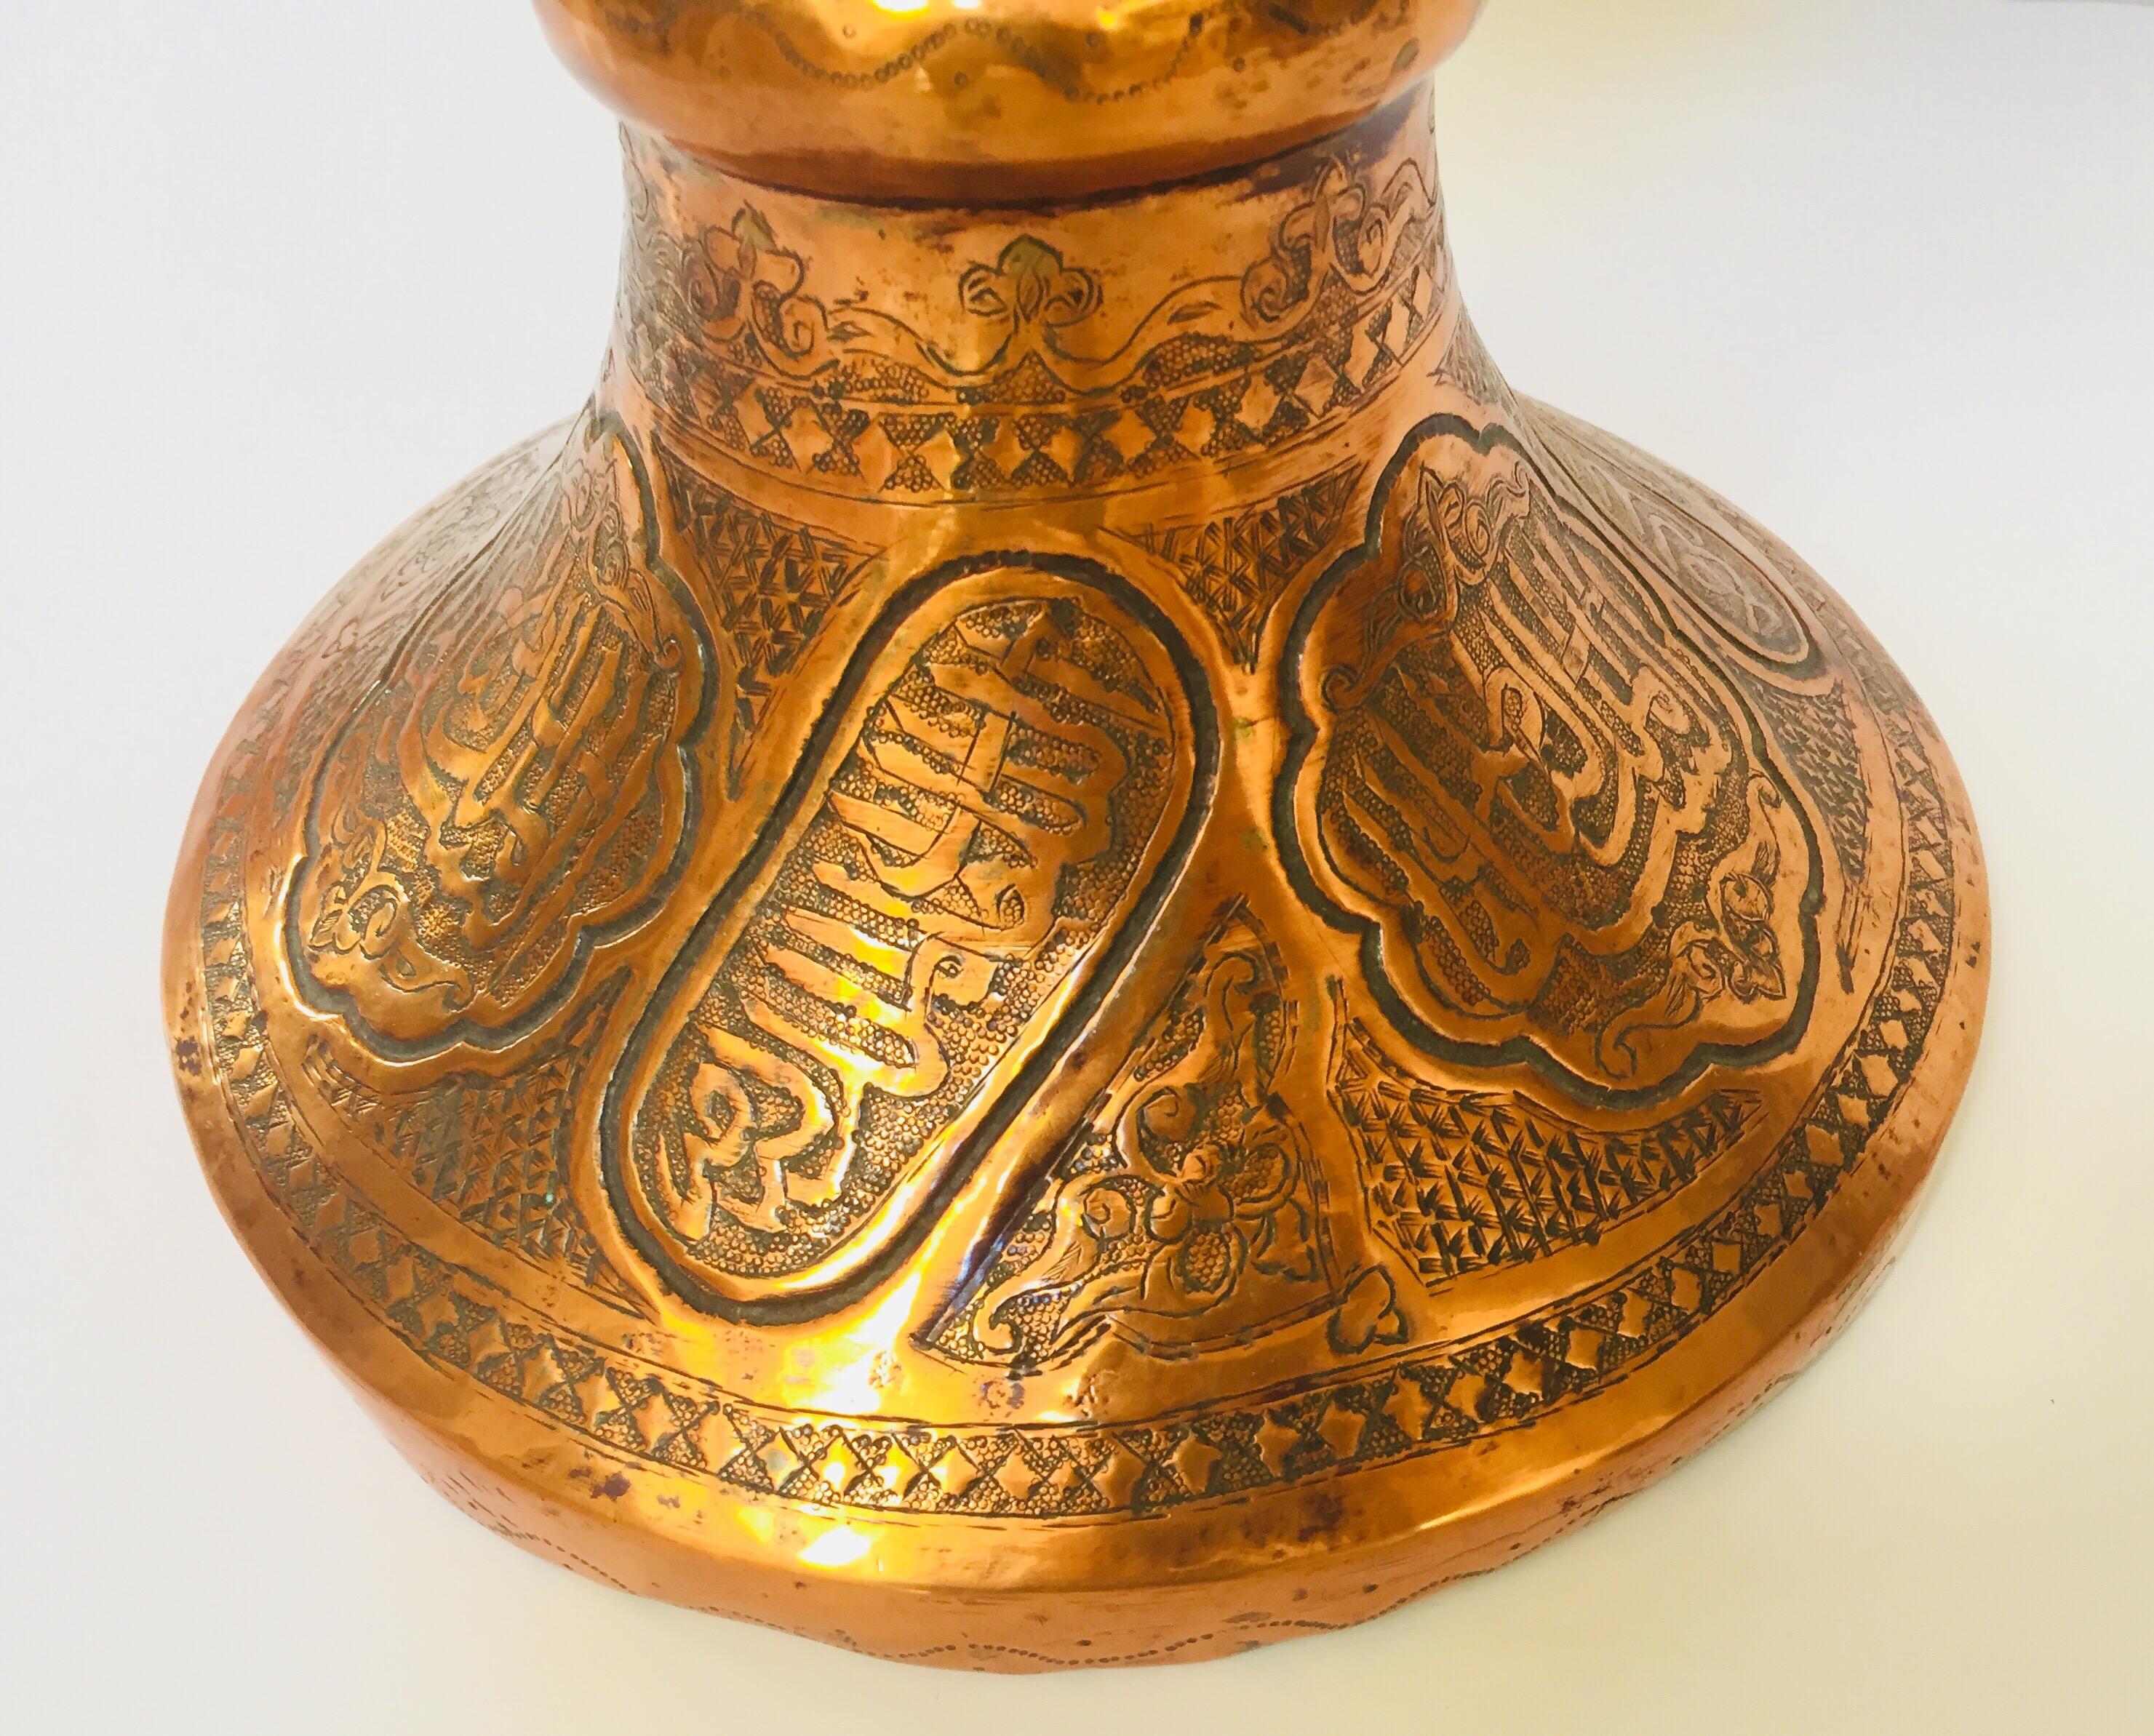 Middle Eastern Syrian Copper Islamic Art Vase Engraved with Arabic Calligraphy 1